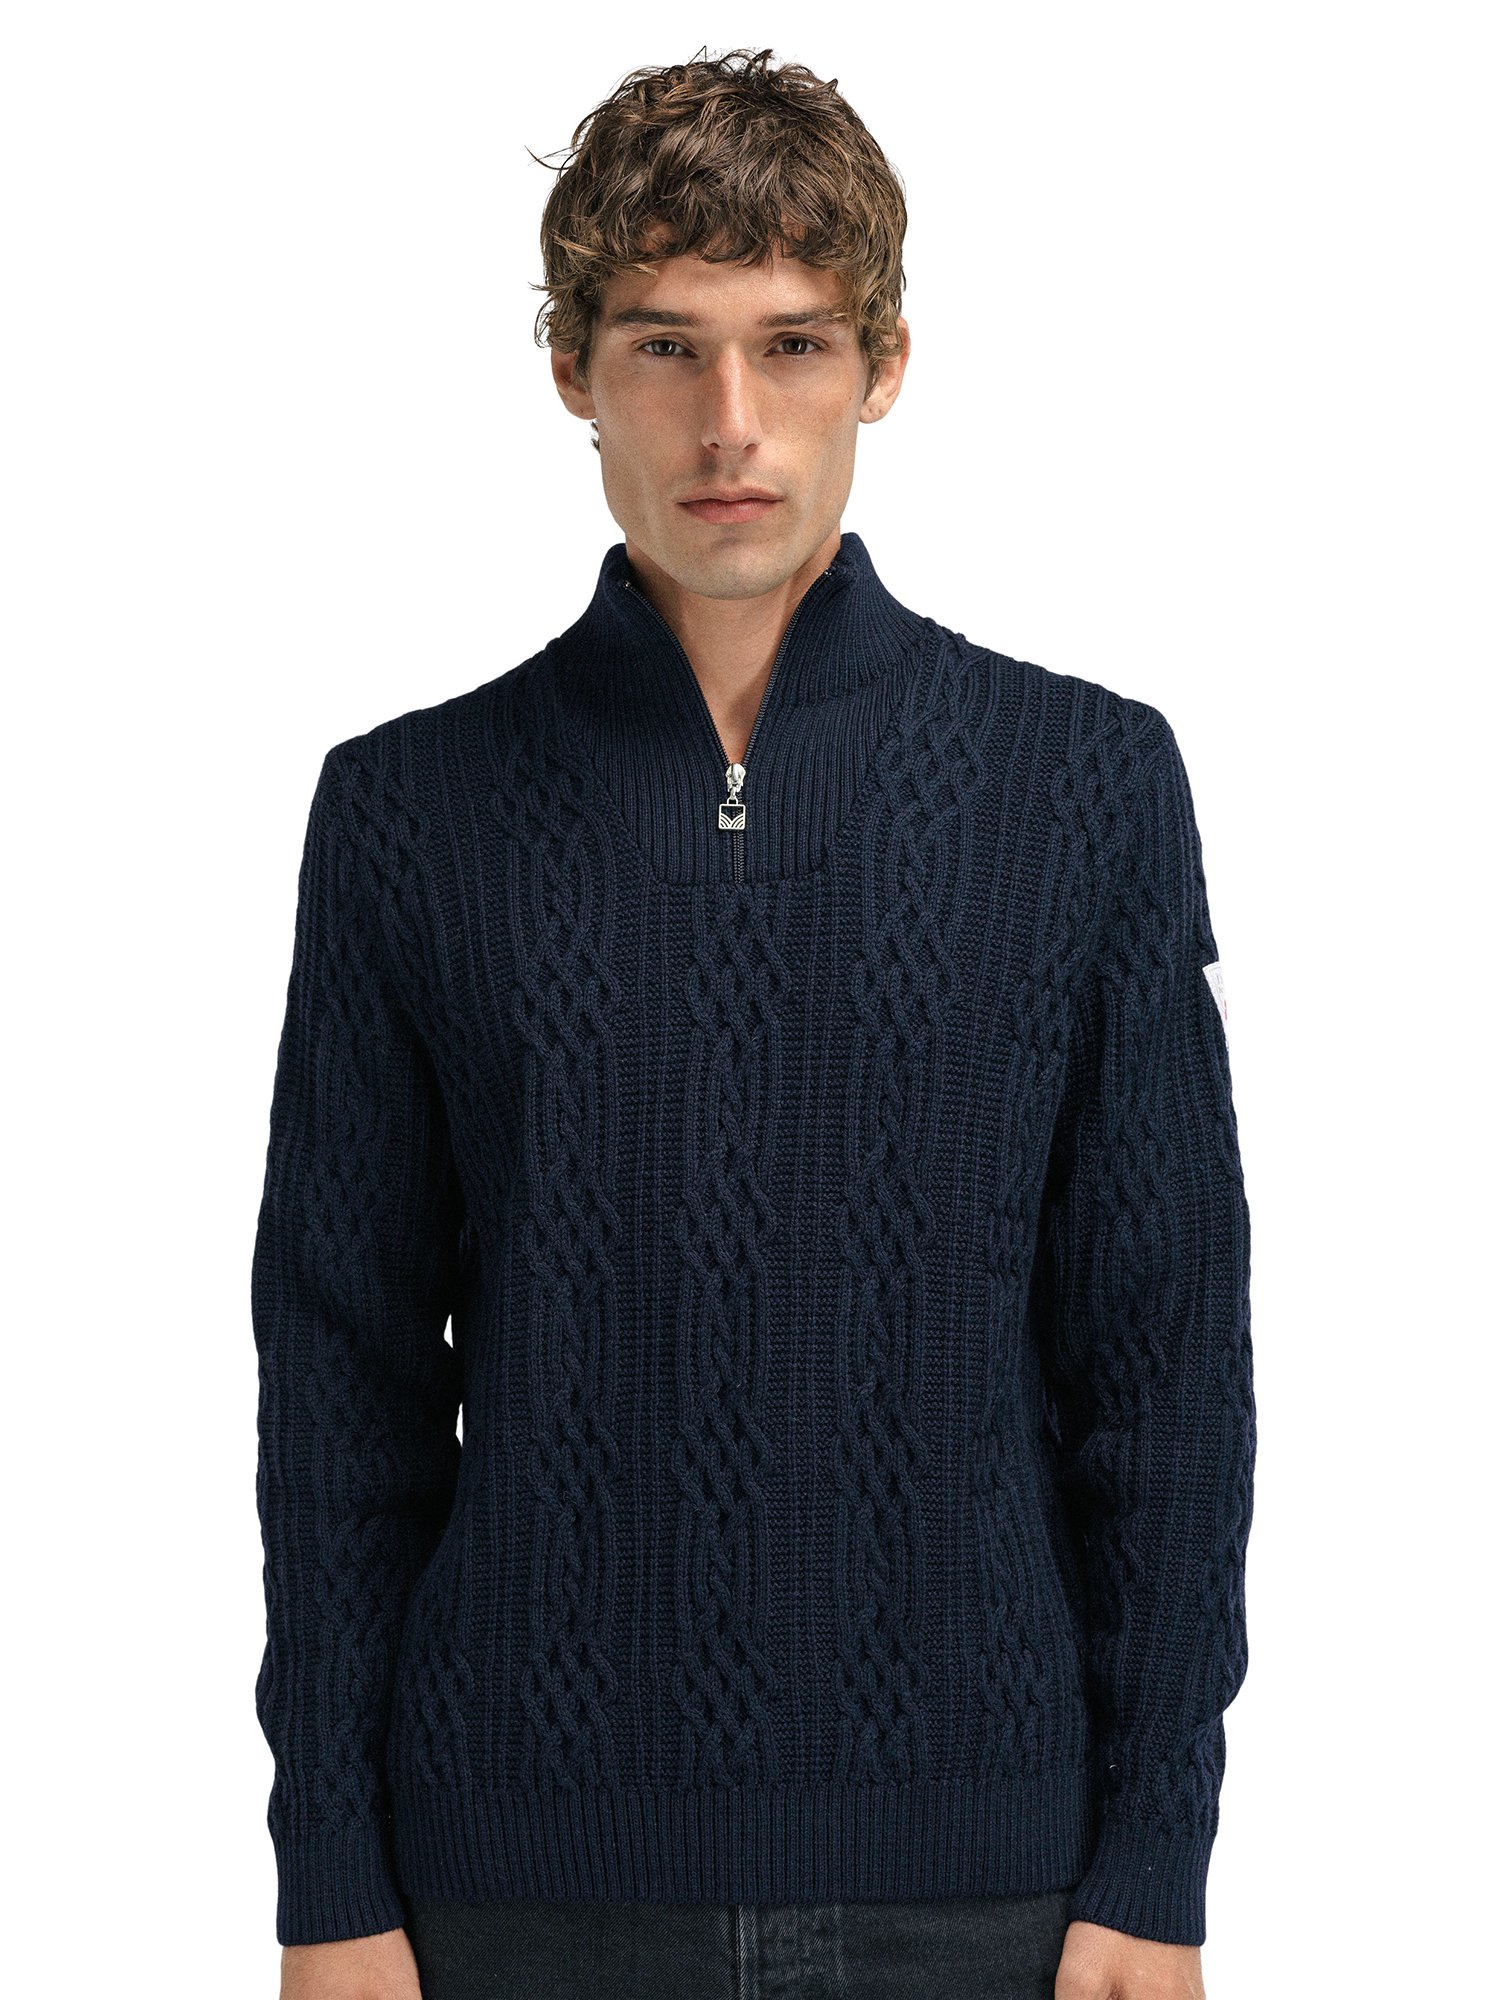 Hoven Knit Sweater - Men - Navy - Dale of Norway - Dale of Norway